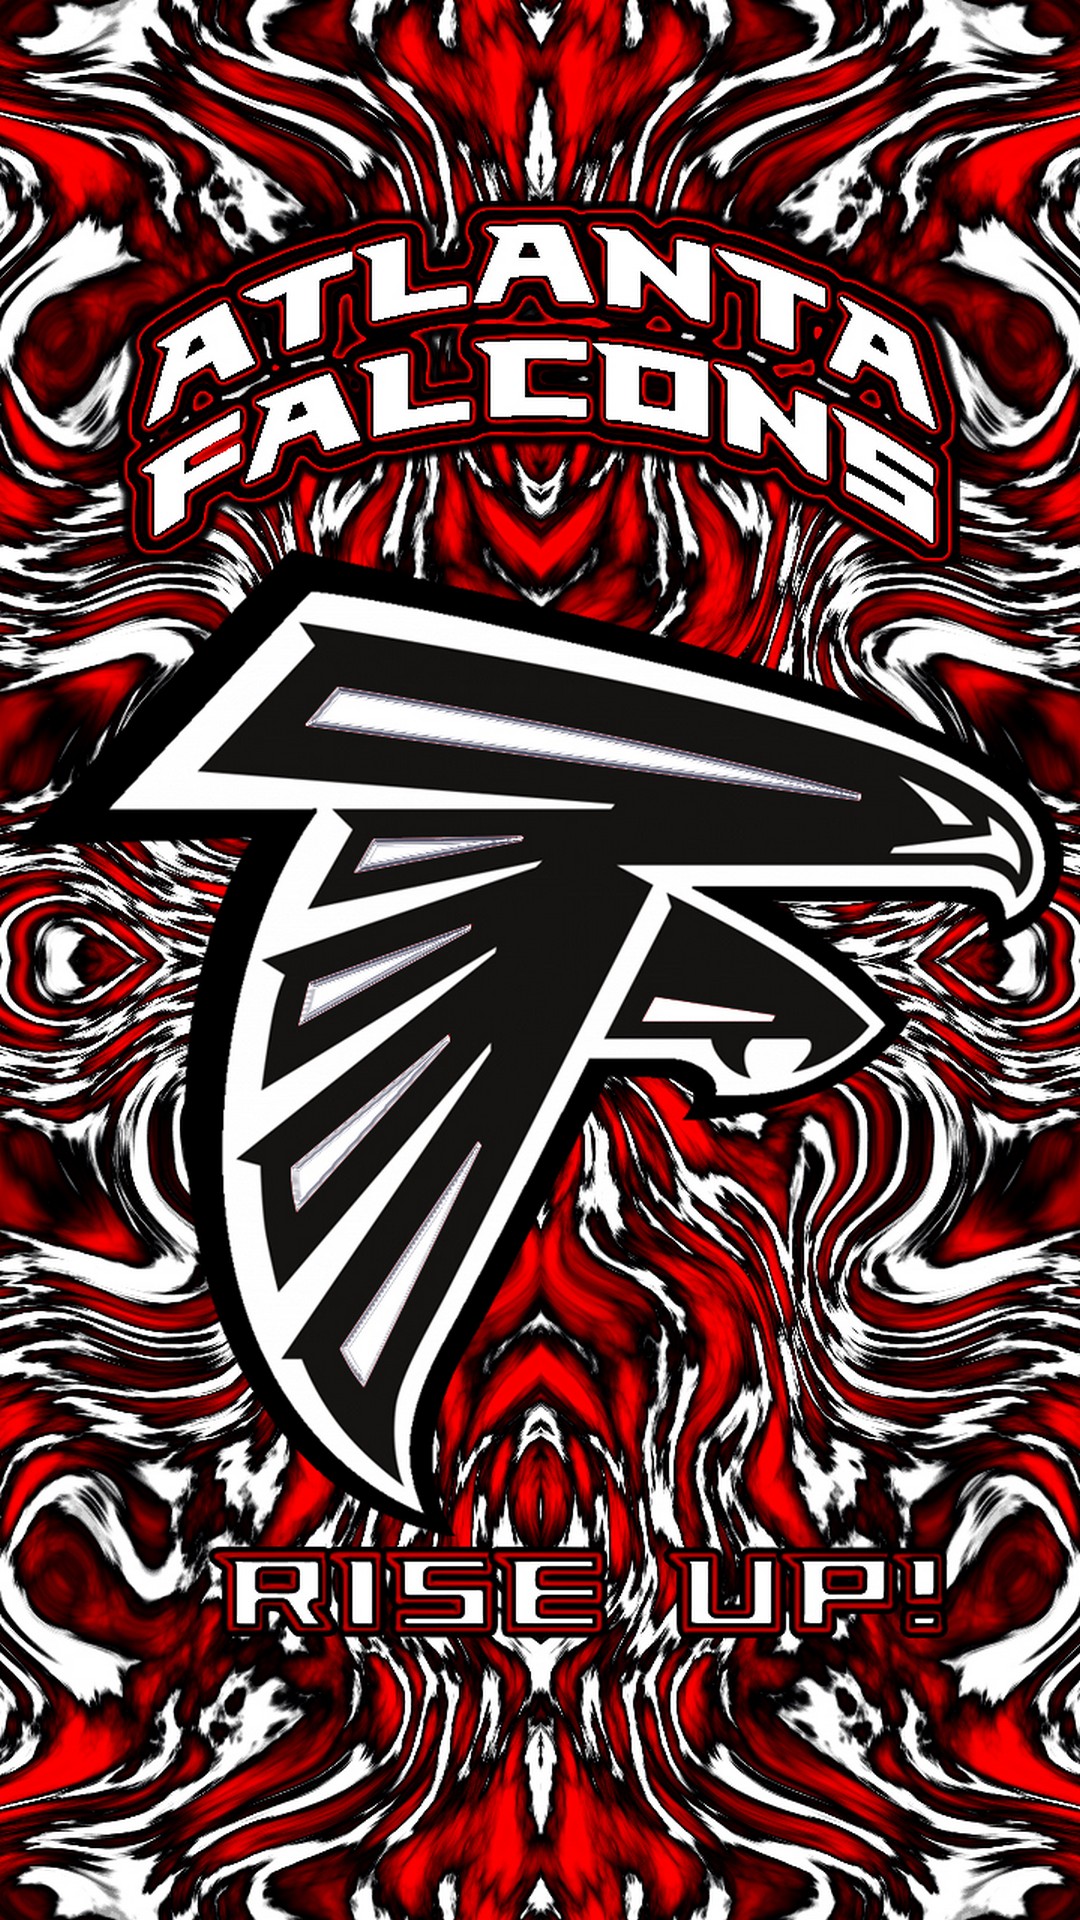 Atlanta Falcons iPhone 7 Wallpaper With high-resolution 1080X1920 pixel. Download and set as wallpaper for Apple iPhone X, XS Max, XR, 8, 7, 6, SE, iPad, Android